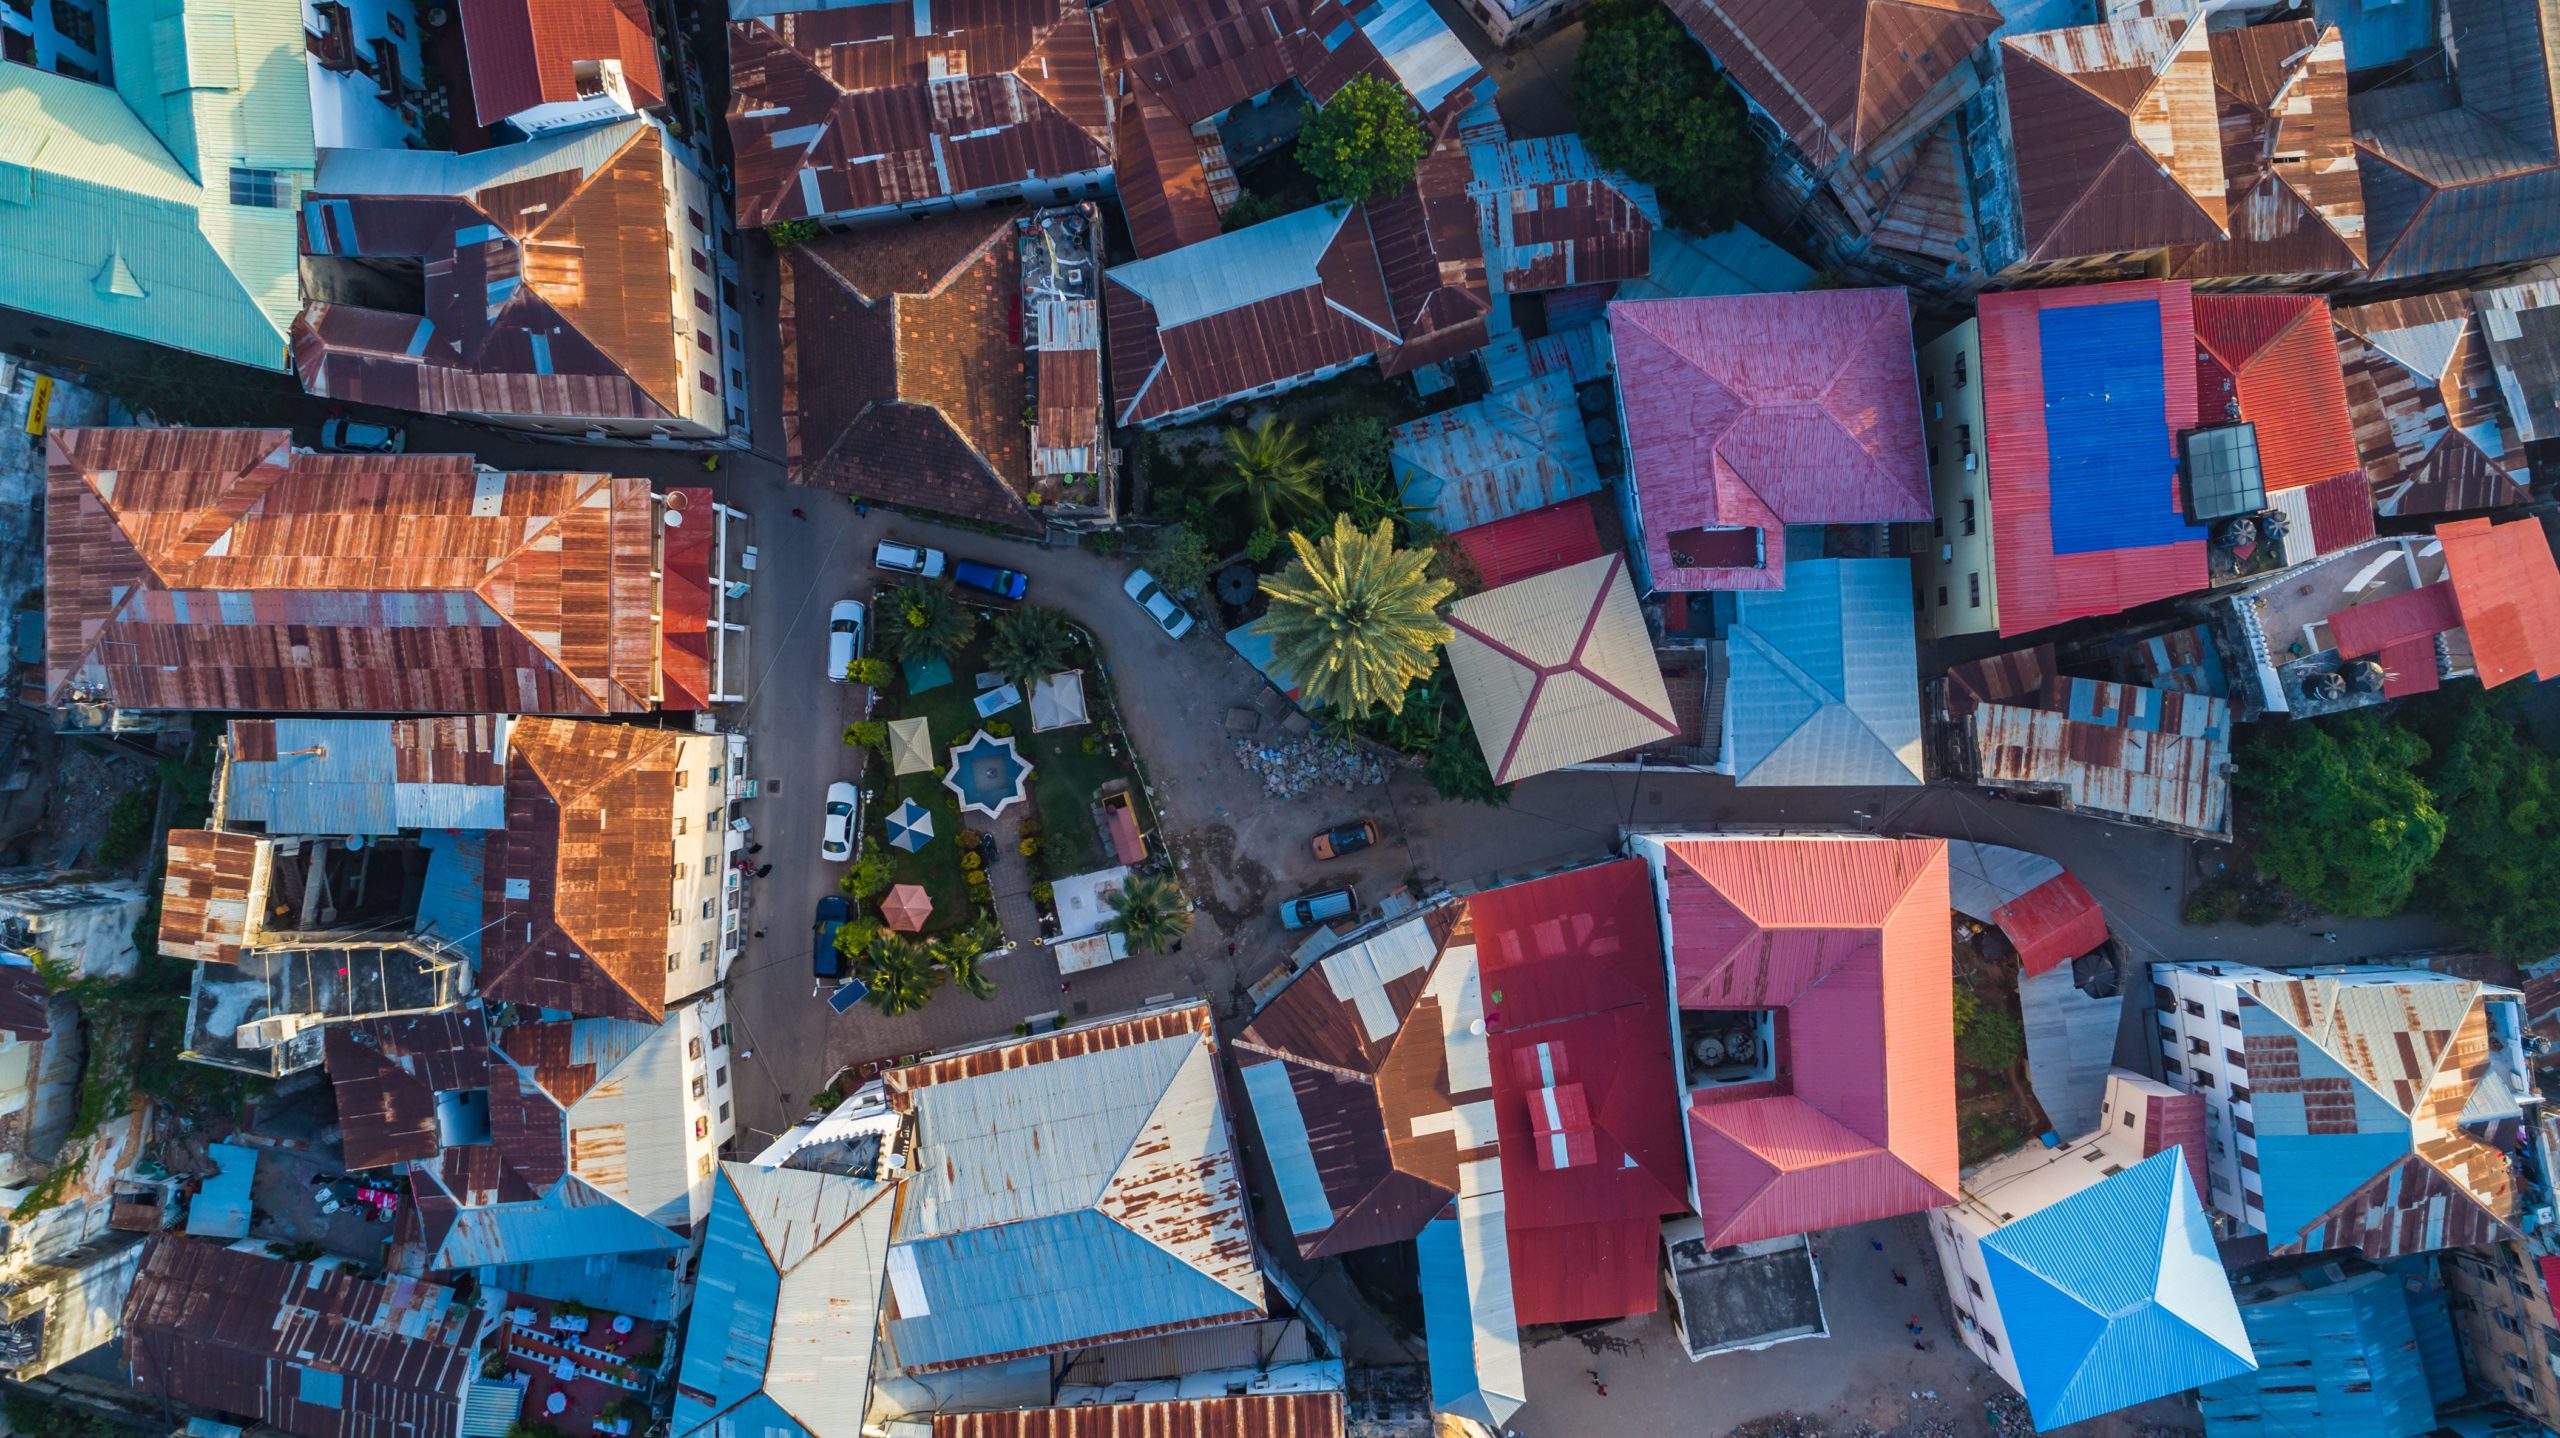 Property tax compliance in Tanzania: Can nudges help? | Speevr